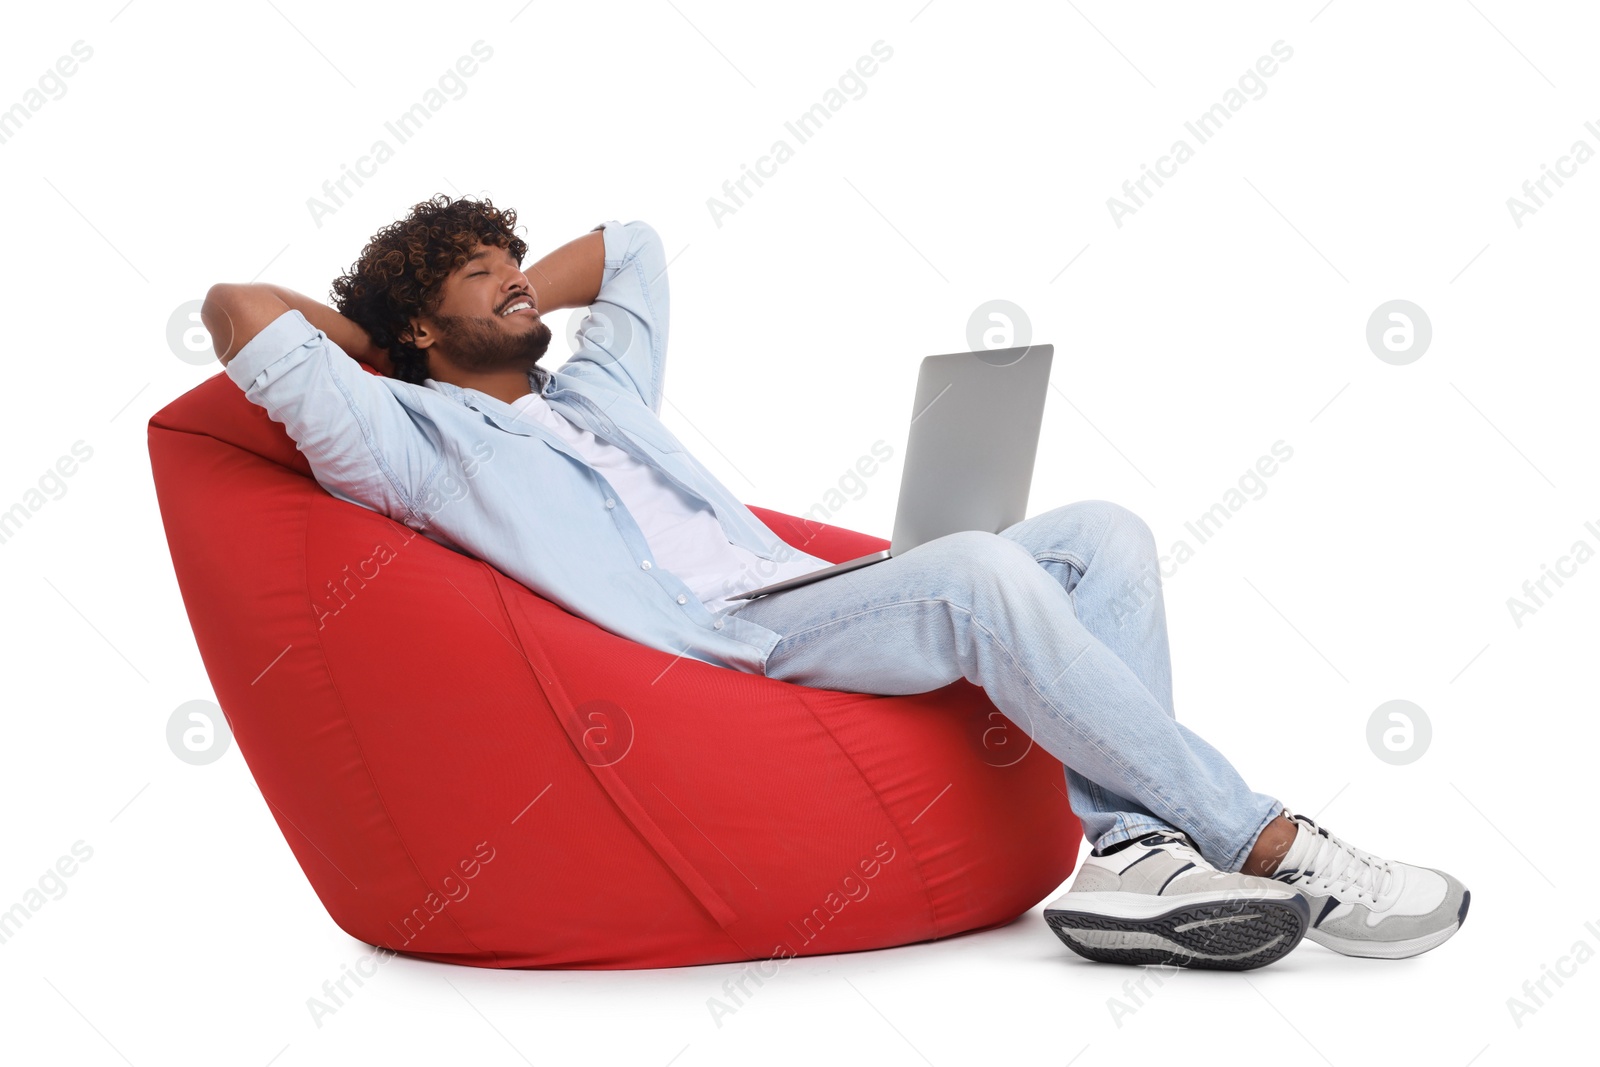 Photo of Smiling man with laptop sitting on beanbag chair against white background